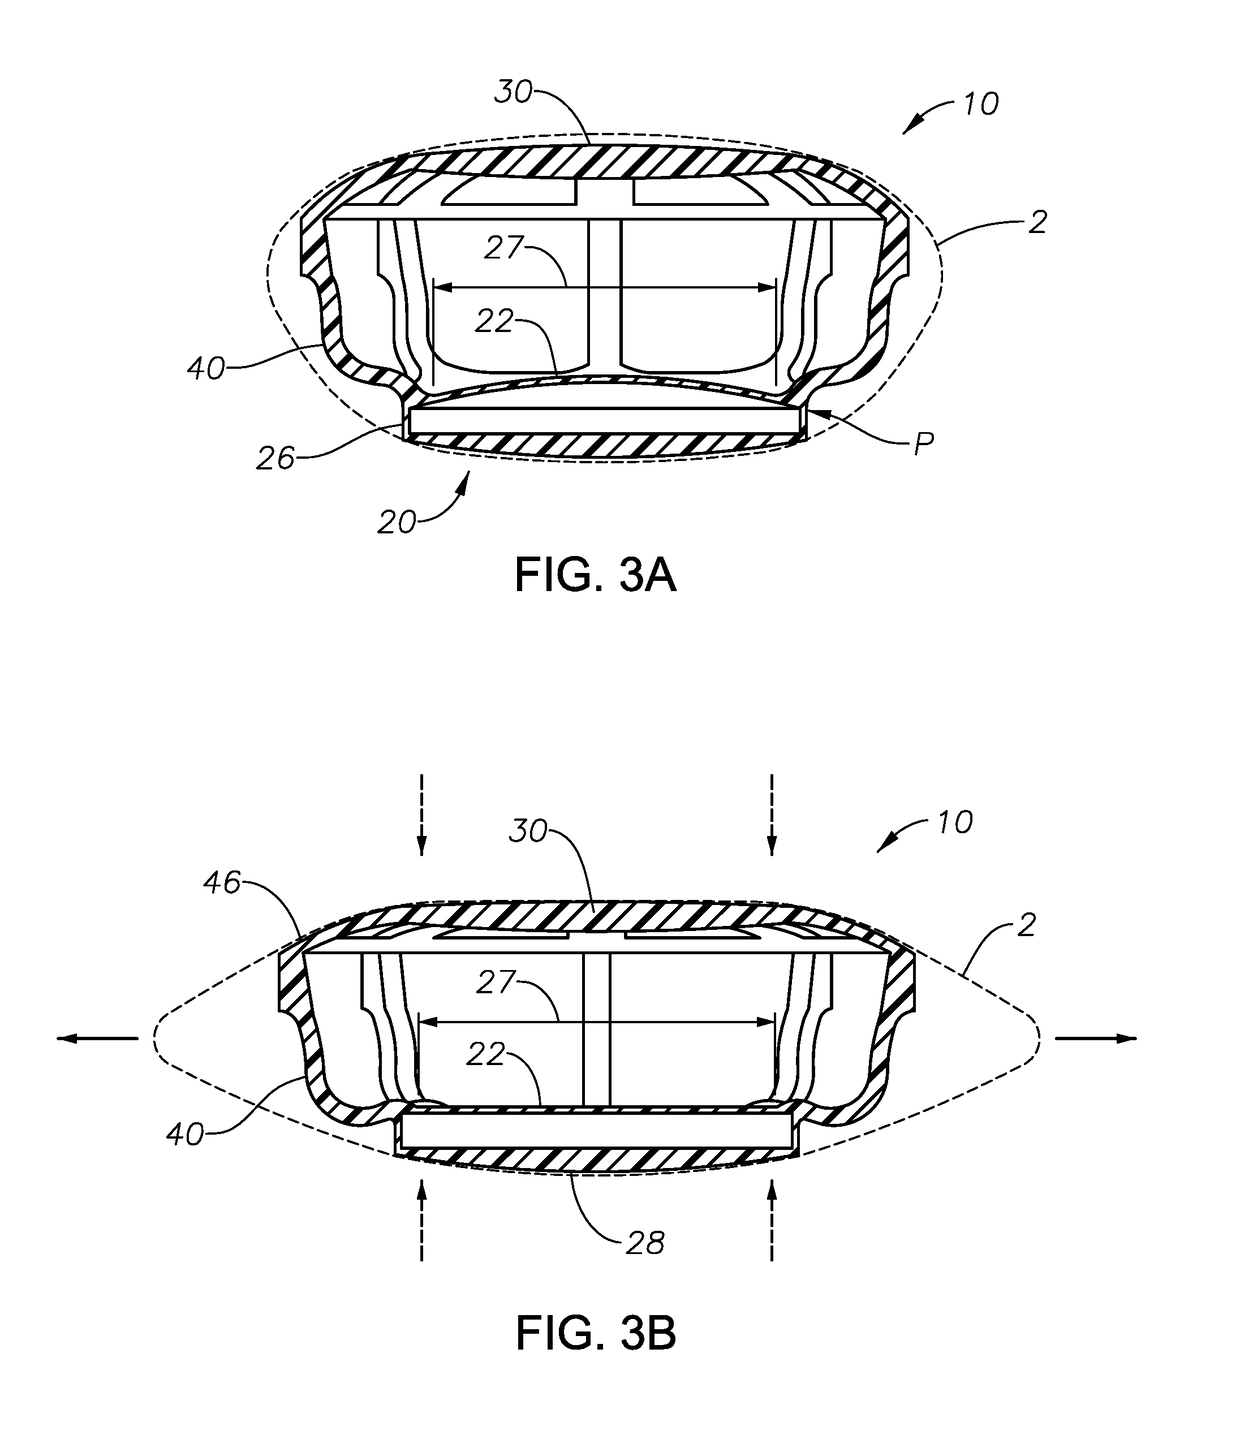 Dual optic, curvature changing accommodative iol having a fixed disaccommodated refractive state